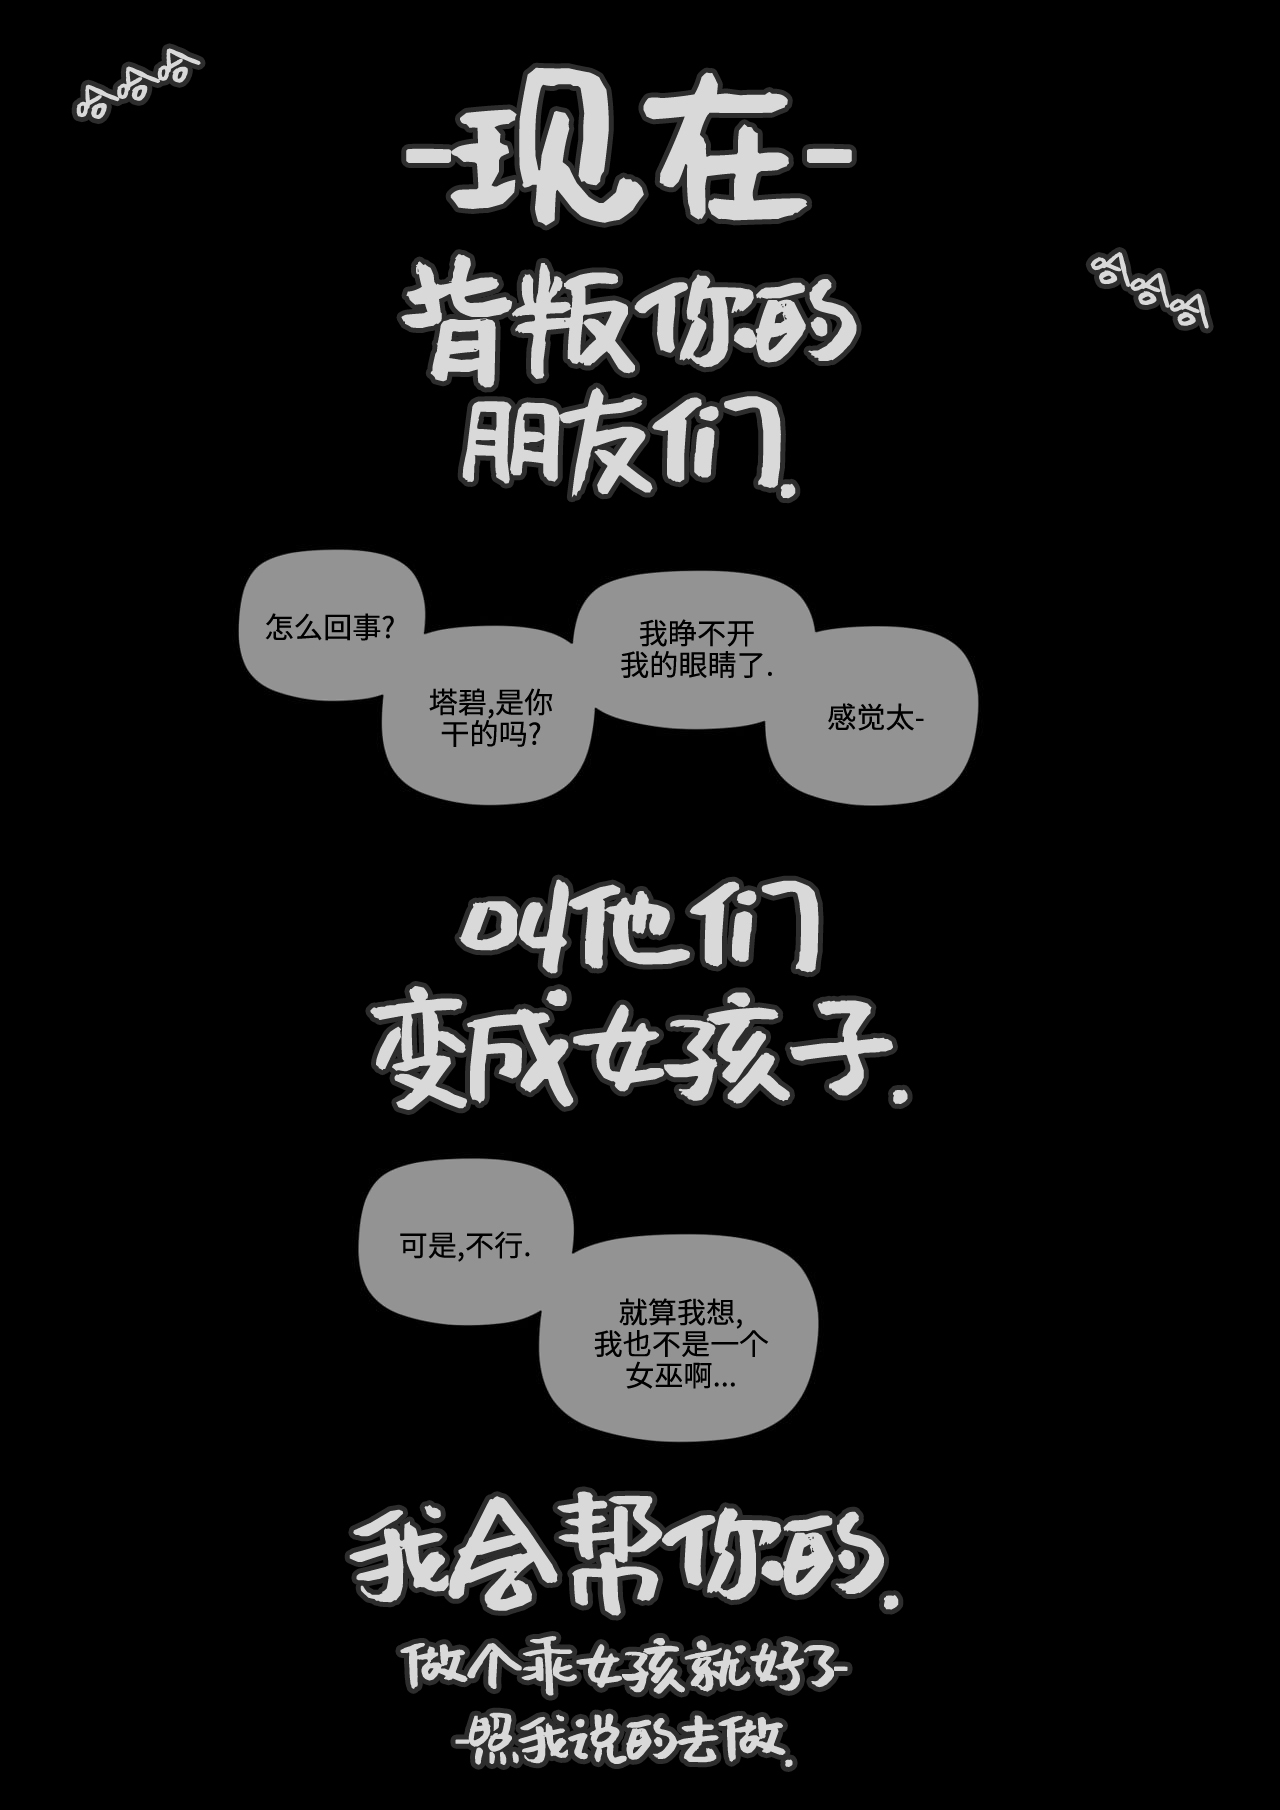 [Corablue] breaking and entering Chapter 2 | 擅闯民宅 第2章 [Chinese] [黑曜石汉化组] 